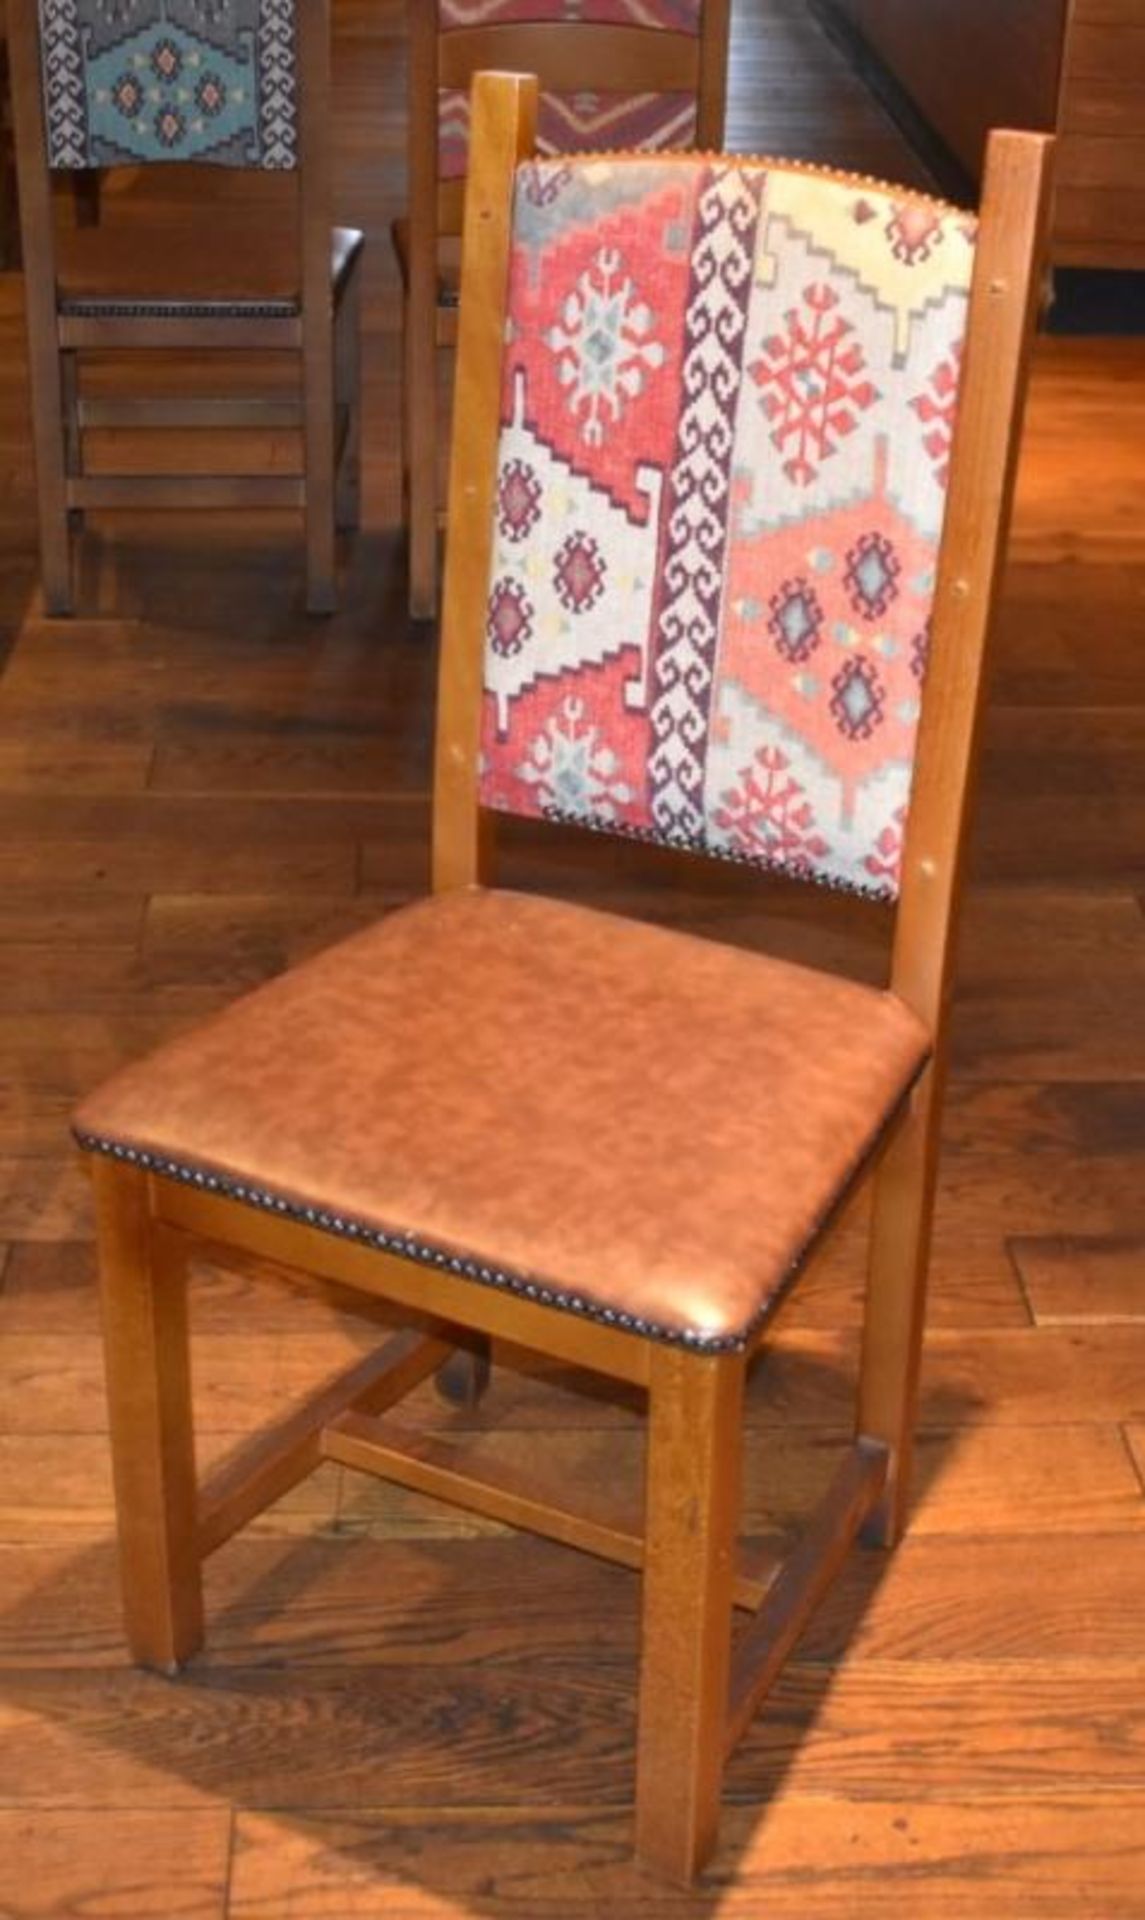 14 x Restaurant High Back Dining Chairs With Faux Leather Brown Seat Pads and Fabric Backs - H100 x